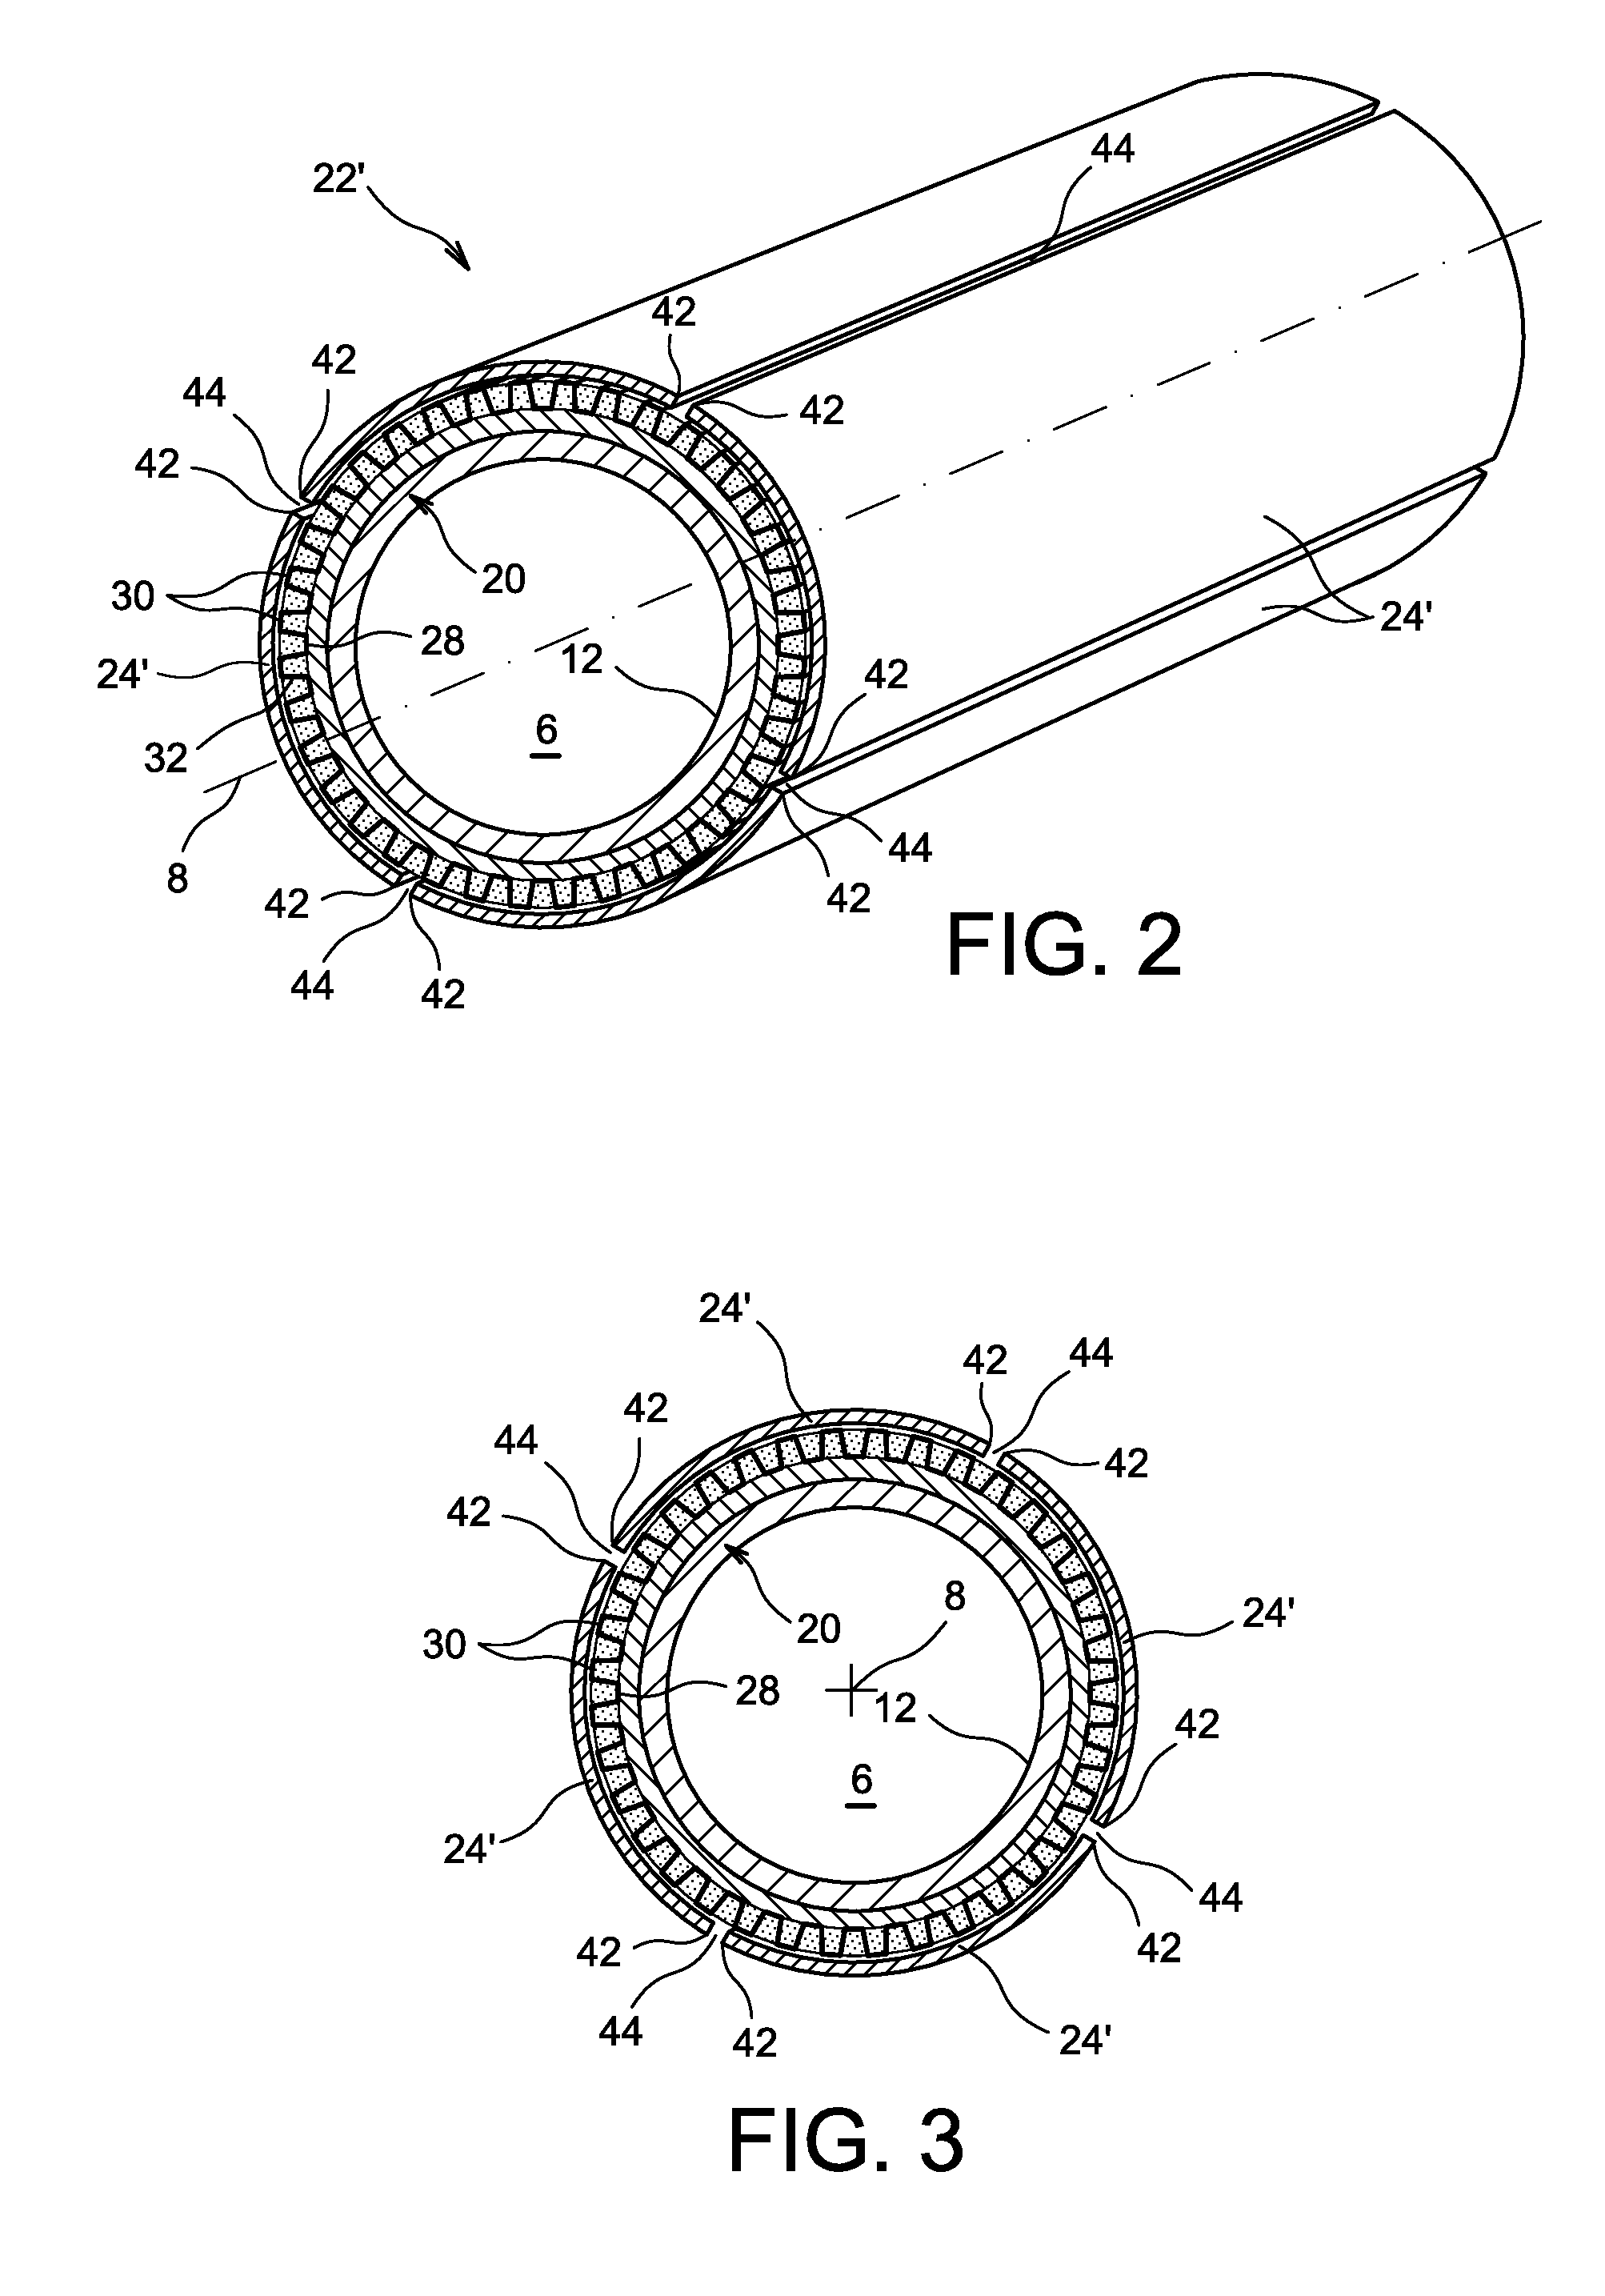 Method for manufacture of a package for the transport and/or storage of nuclear material, using the phenomenon of welding shrinkage